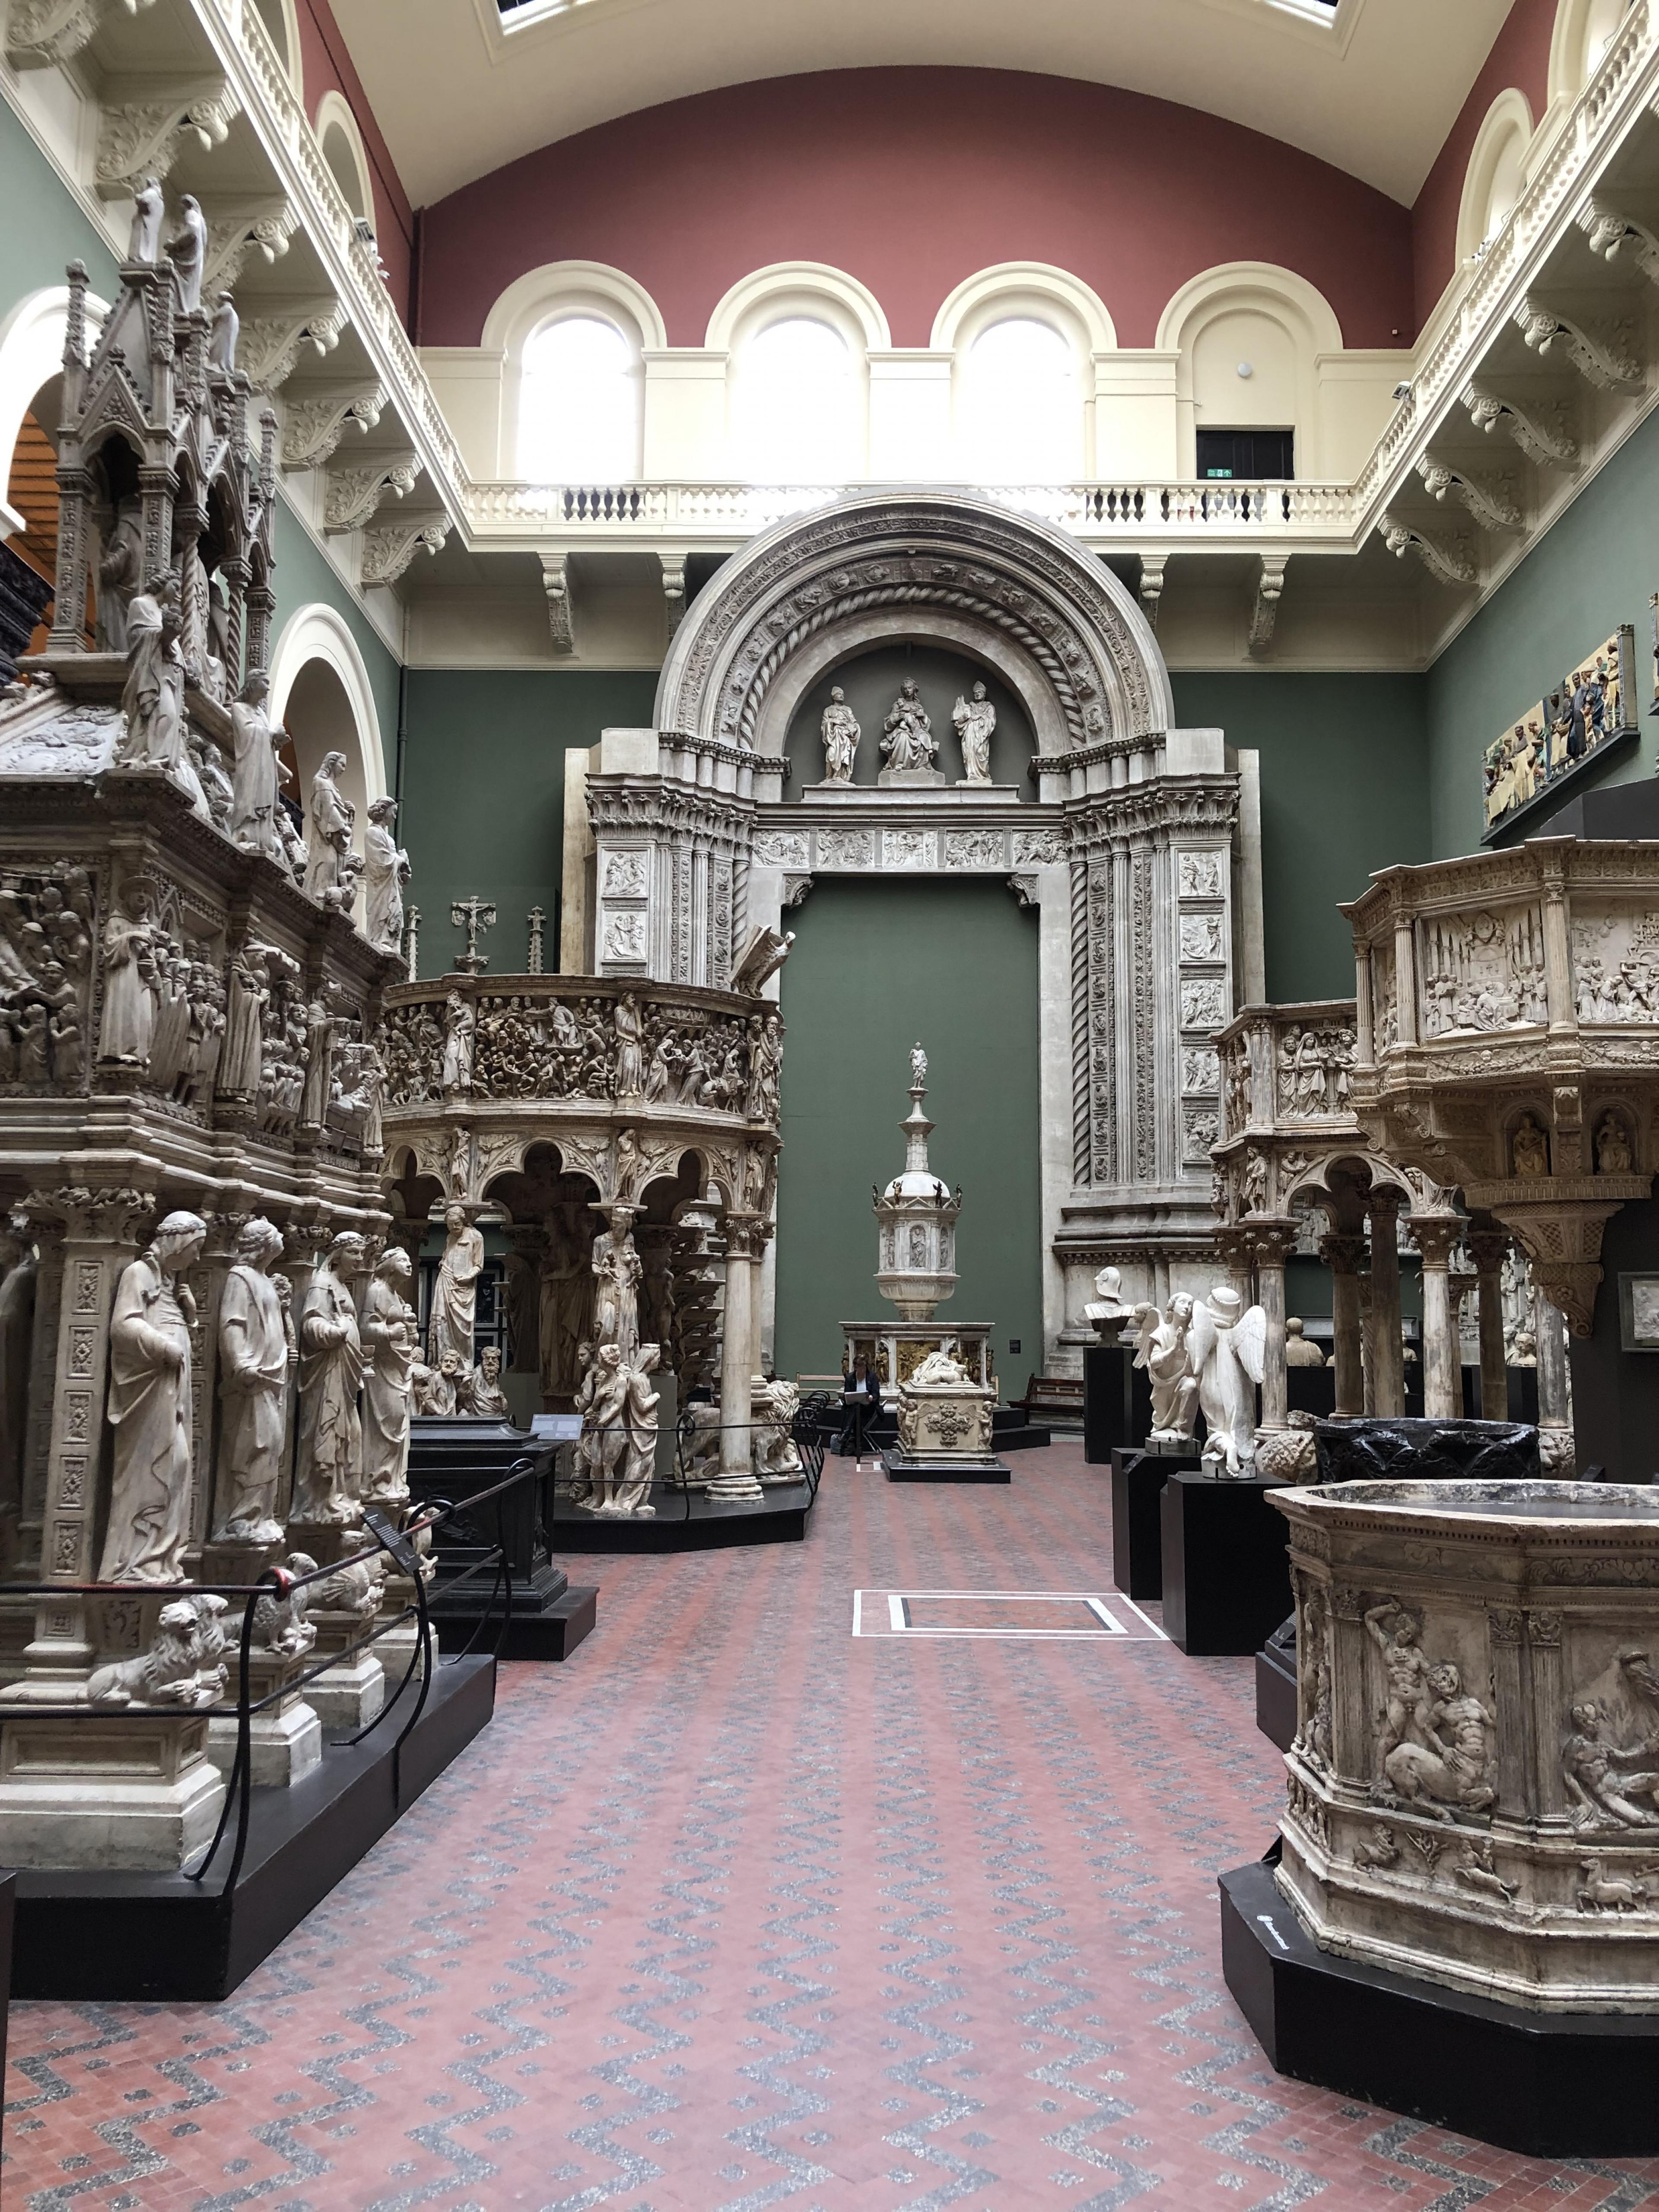 inside a historic museum in london with high ceilings and Gothic church sculptures on display